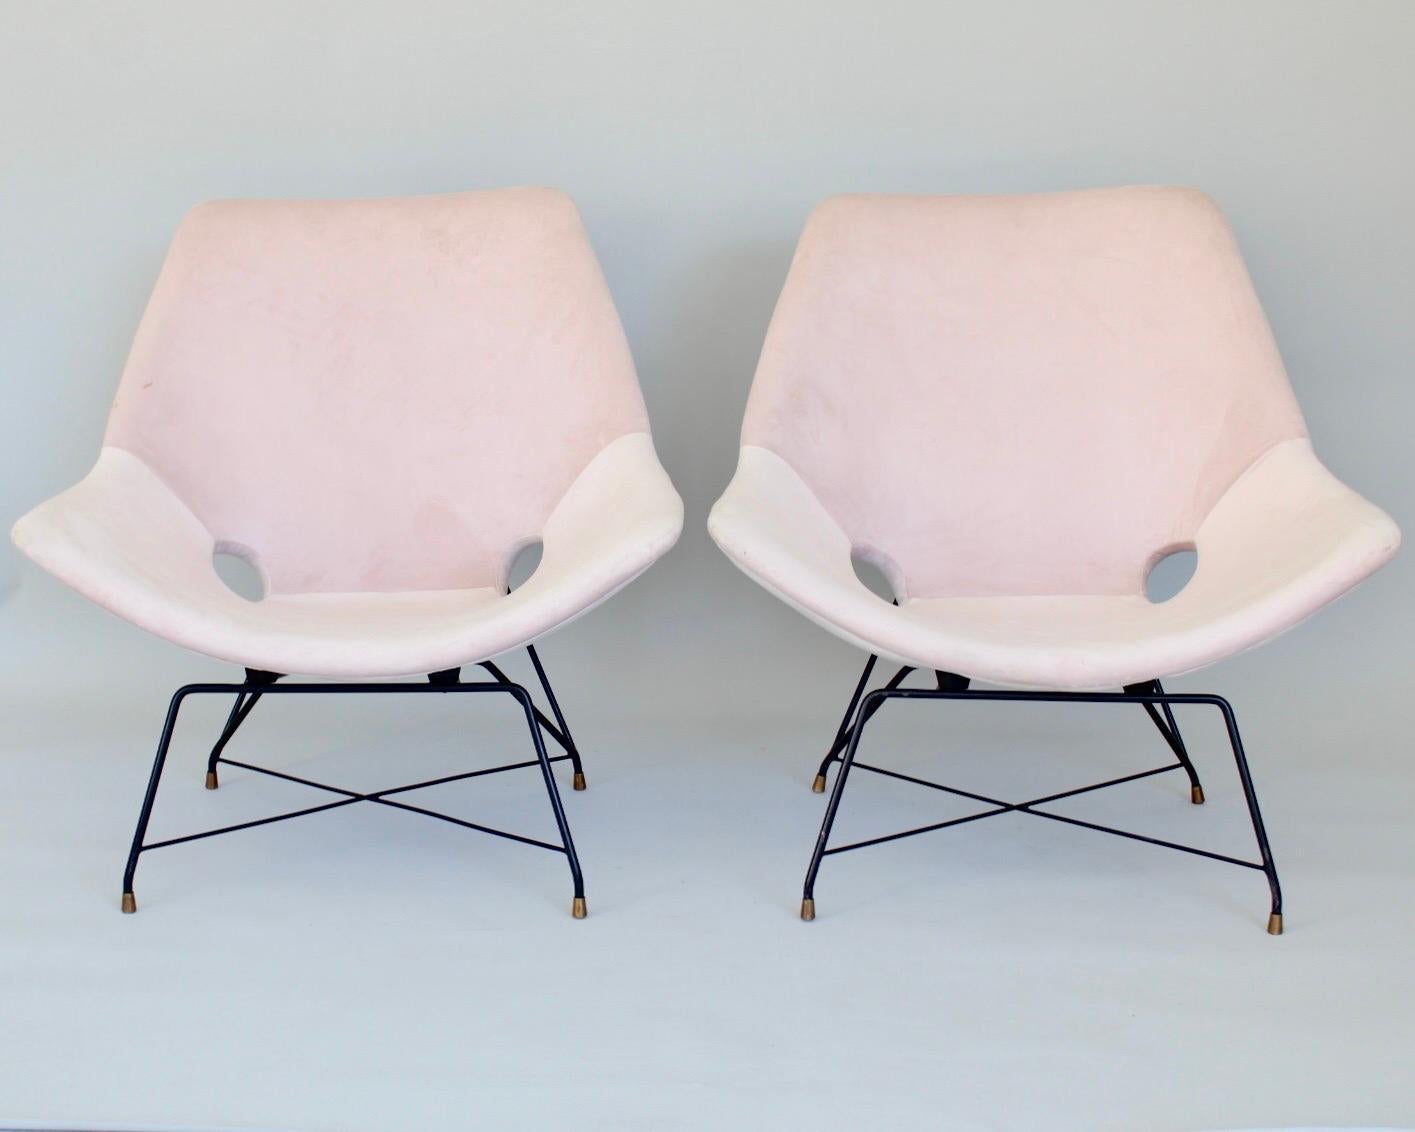 A pair of Kosmos lounge chairs designed by Augusto Bozzi for Saporiti in Italy, 1954. The chairs are reupholstered in a pale pink velvet fabric, the curved seats are amazingly comfortable. The black metal legs are in excellent condition terminated